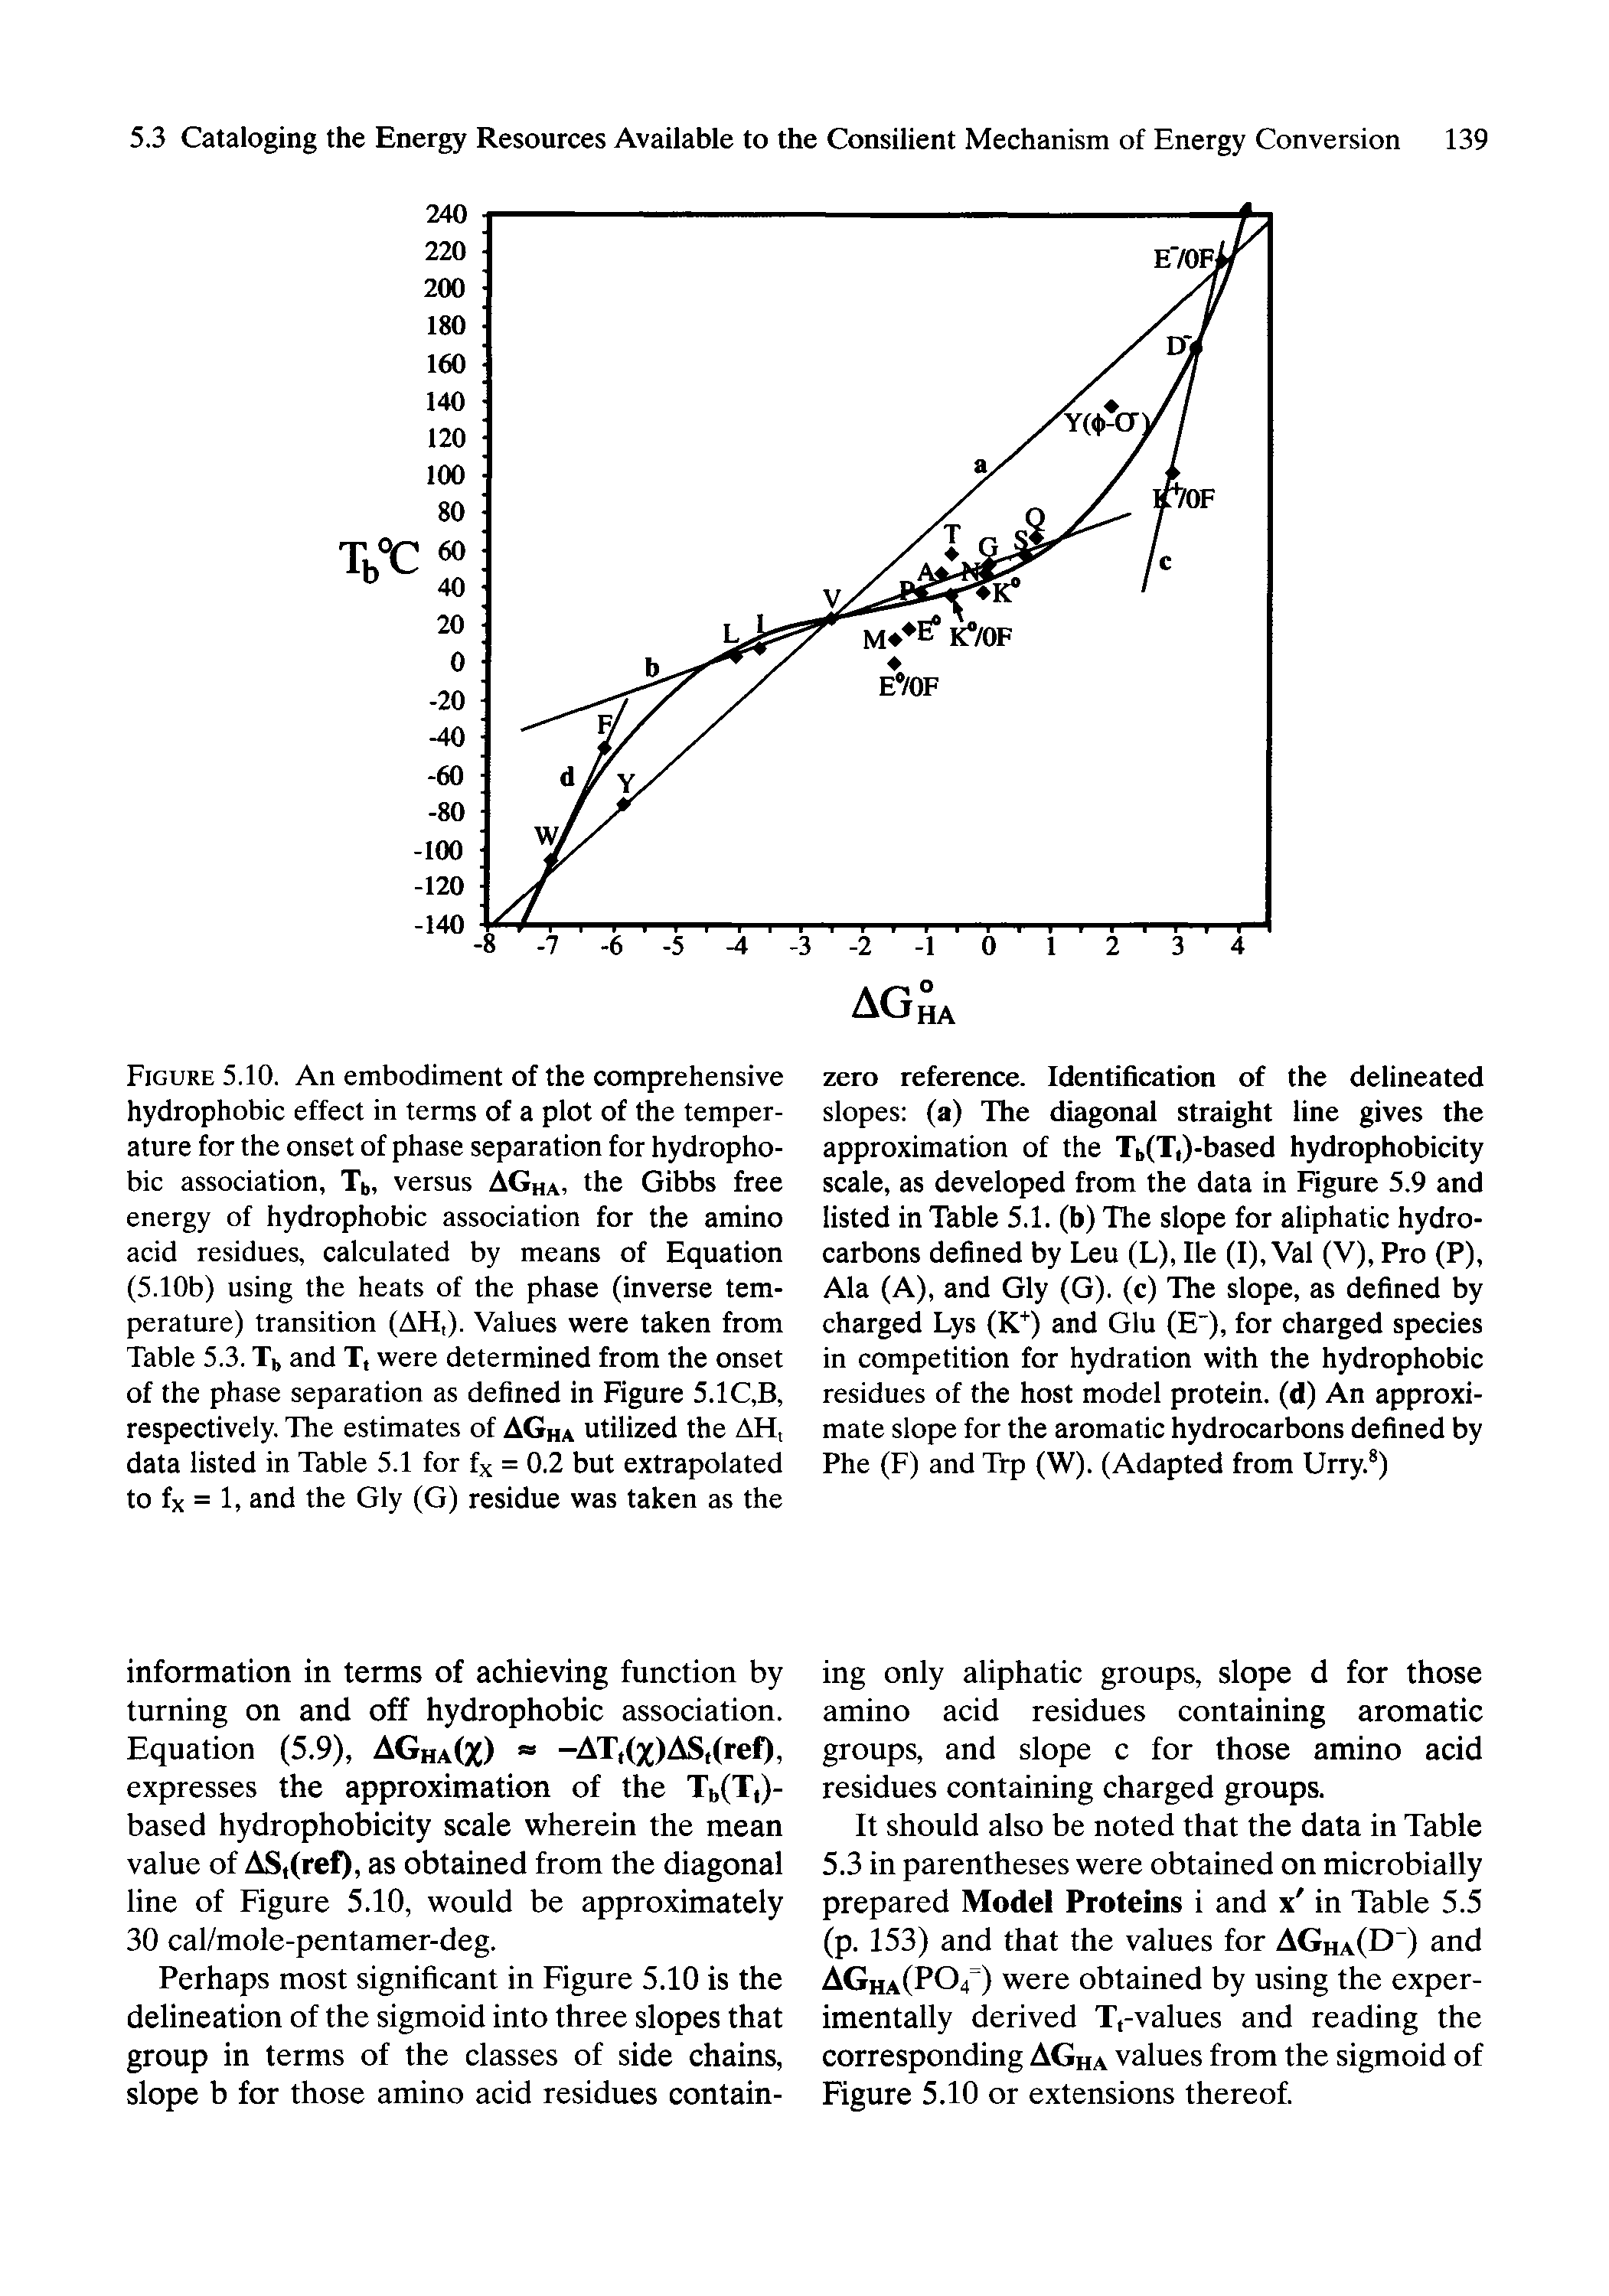 Figure 5.10. An embodiment of the comprehensive hydrophobic effect in terms of a plot of the temperature for the onset of phase separation for hydrophobic association, Tb, versus AGha. the Gibbs free energy of hydrophobic association for the amino acid residues, calculated by means of Equation (5.10b) using the heats of the phase (inverse temperature) transition (AH,). Values were taken from Table 5.3. Tb and T, were determined from the onset of the phase separation as defined in Figure 5.1C,B, respectively. The estimates of AGha utilized the AH, data listed in Table 5.1 for fx = 0.2 but extrapolated to fx = 1, and the Gly (G) residue was taken as the...